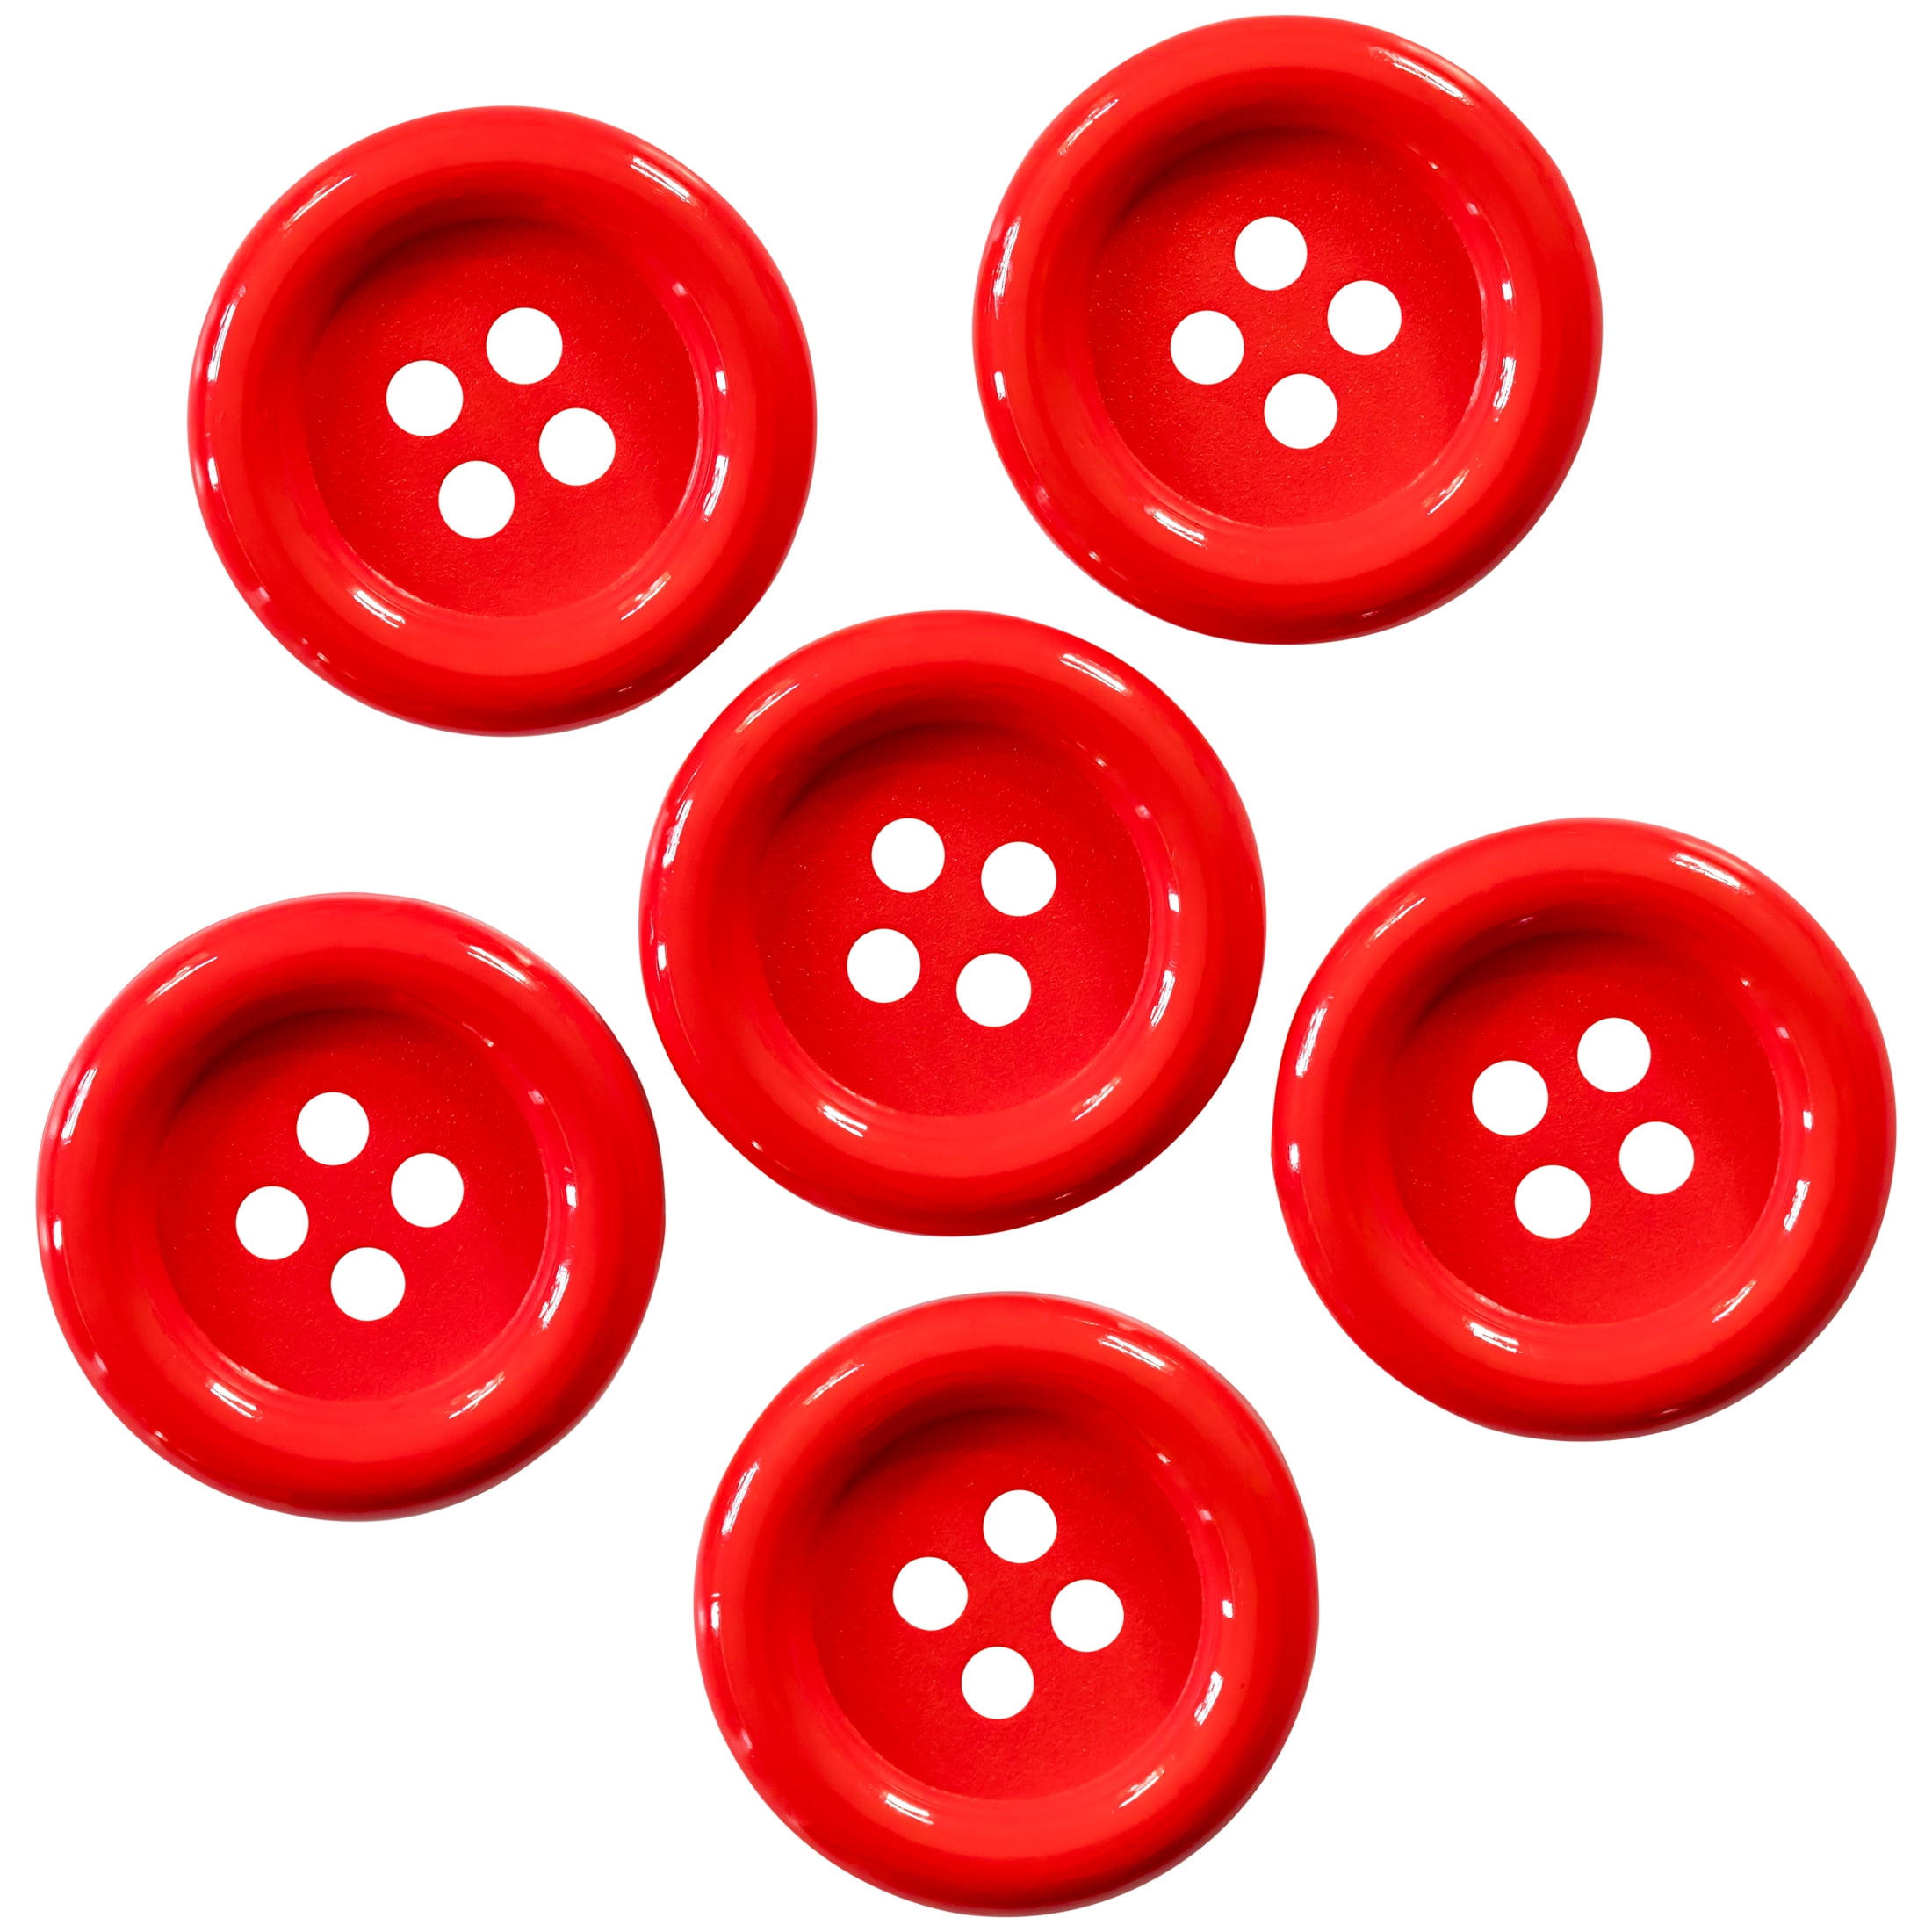 10 Clear Red Buttons, 1 1/8 Bright Red Clear Buttons, Sewing, Crafting,  Jewelry av 30 